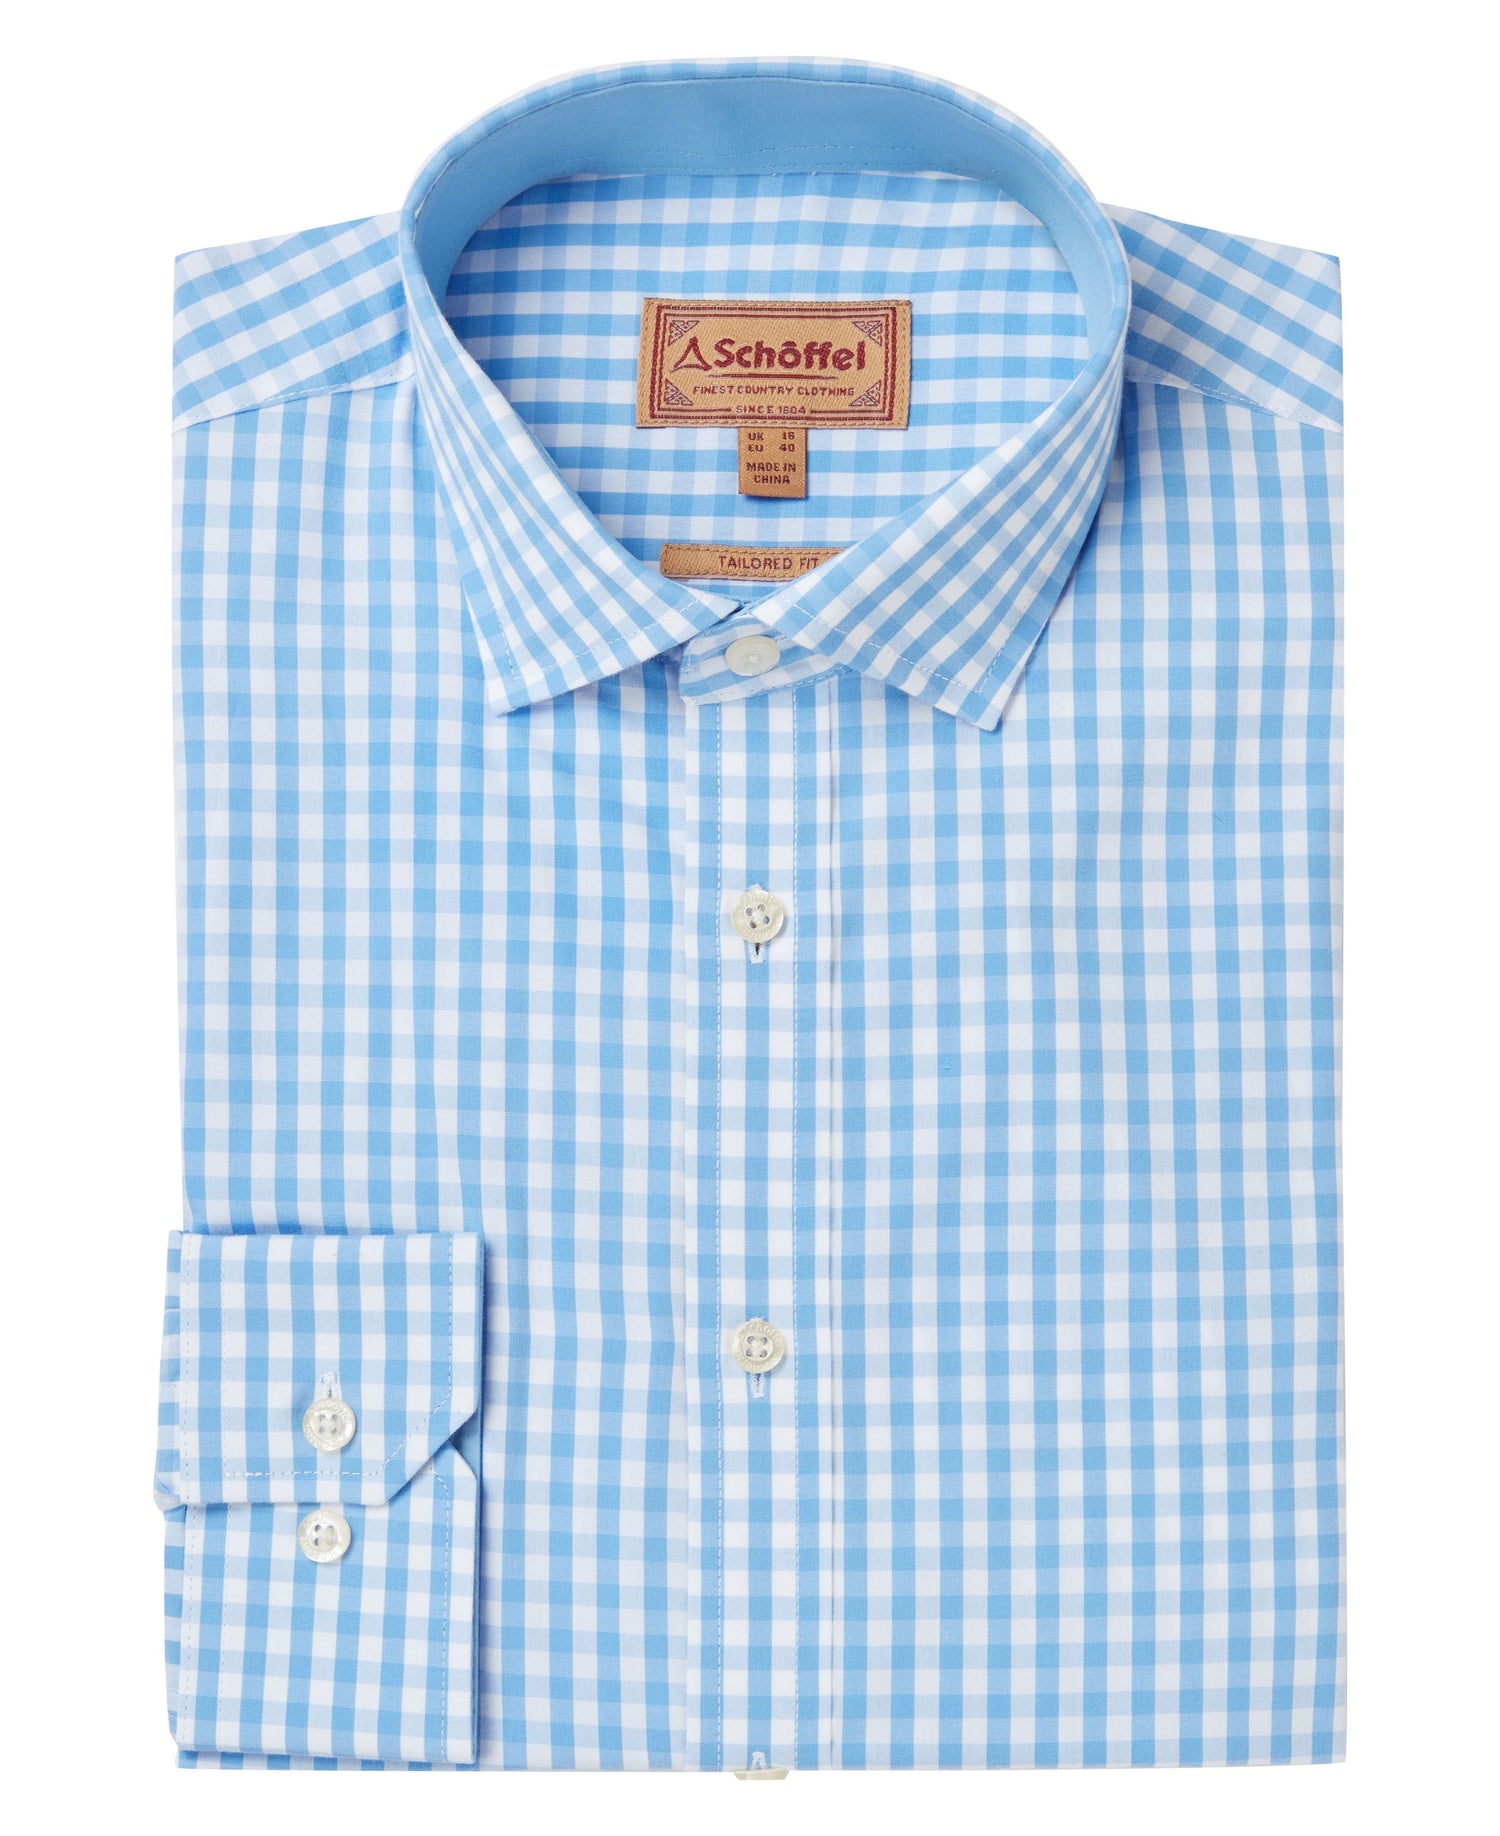 Thorpeness Tailored Shirt - Blue Check